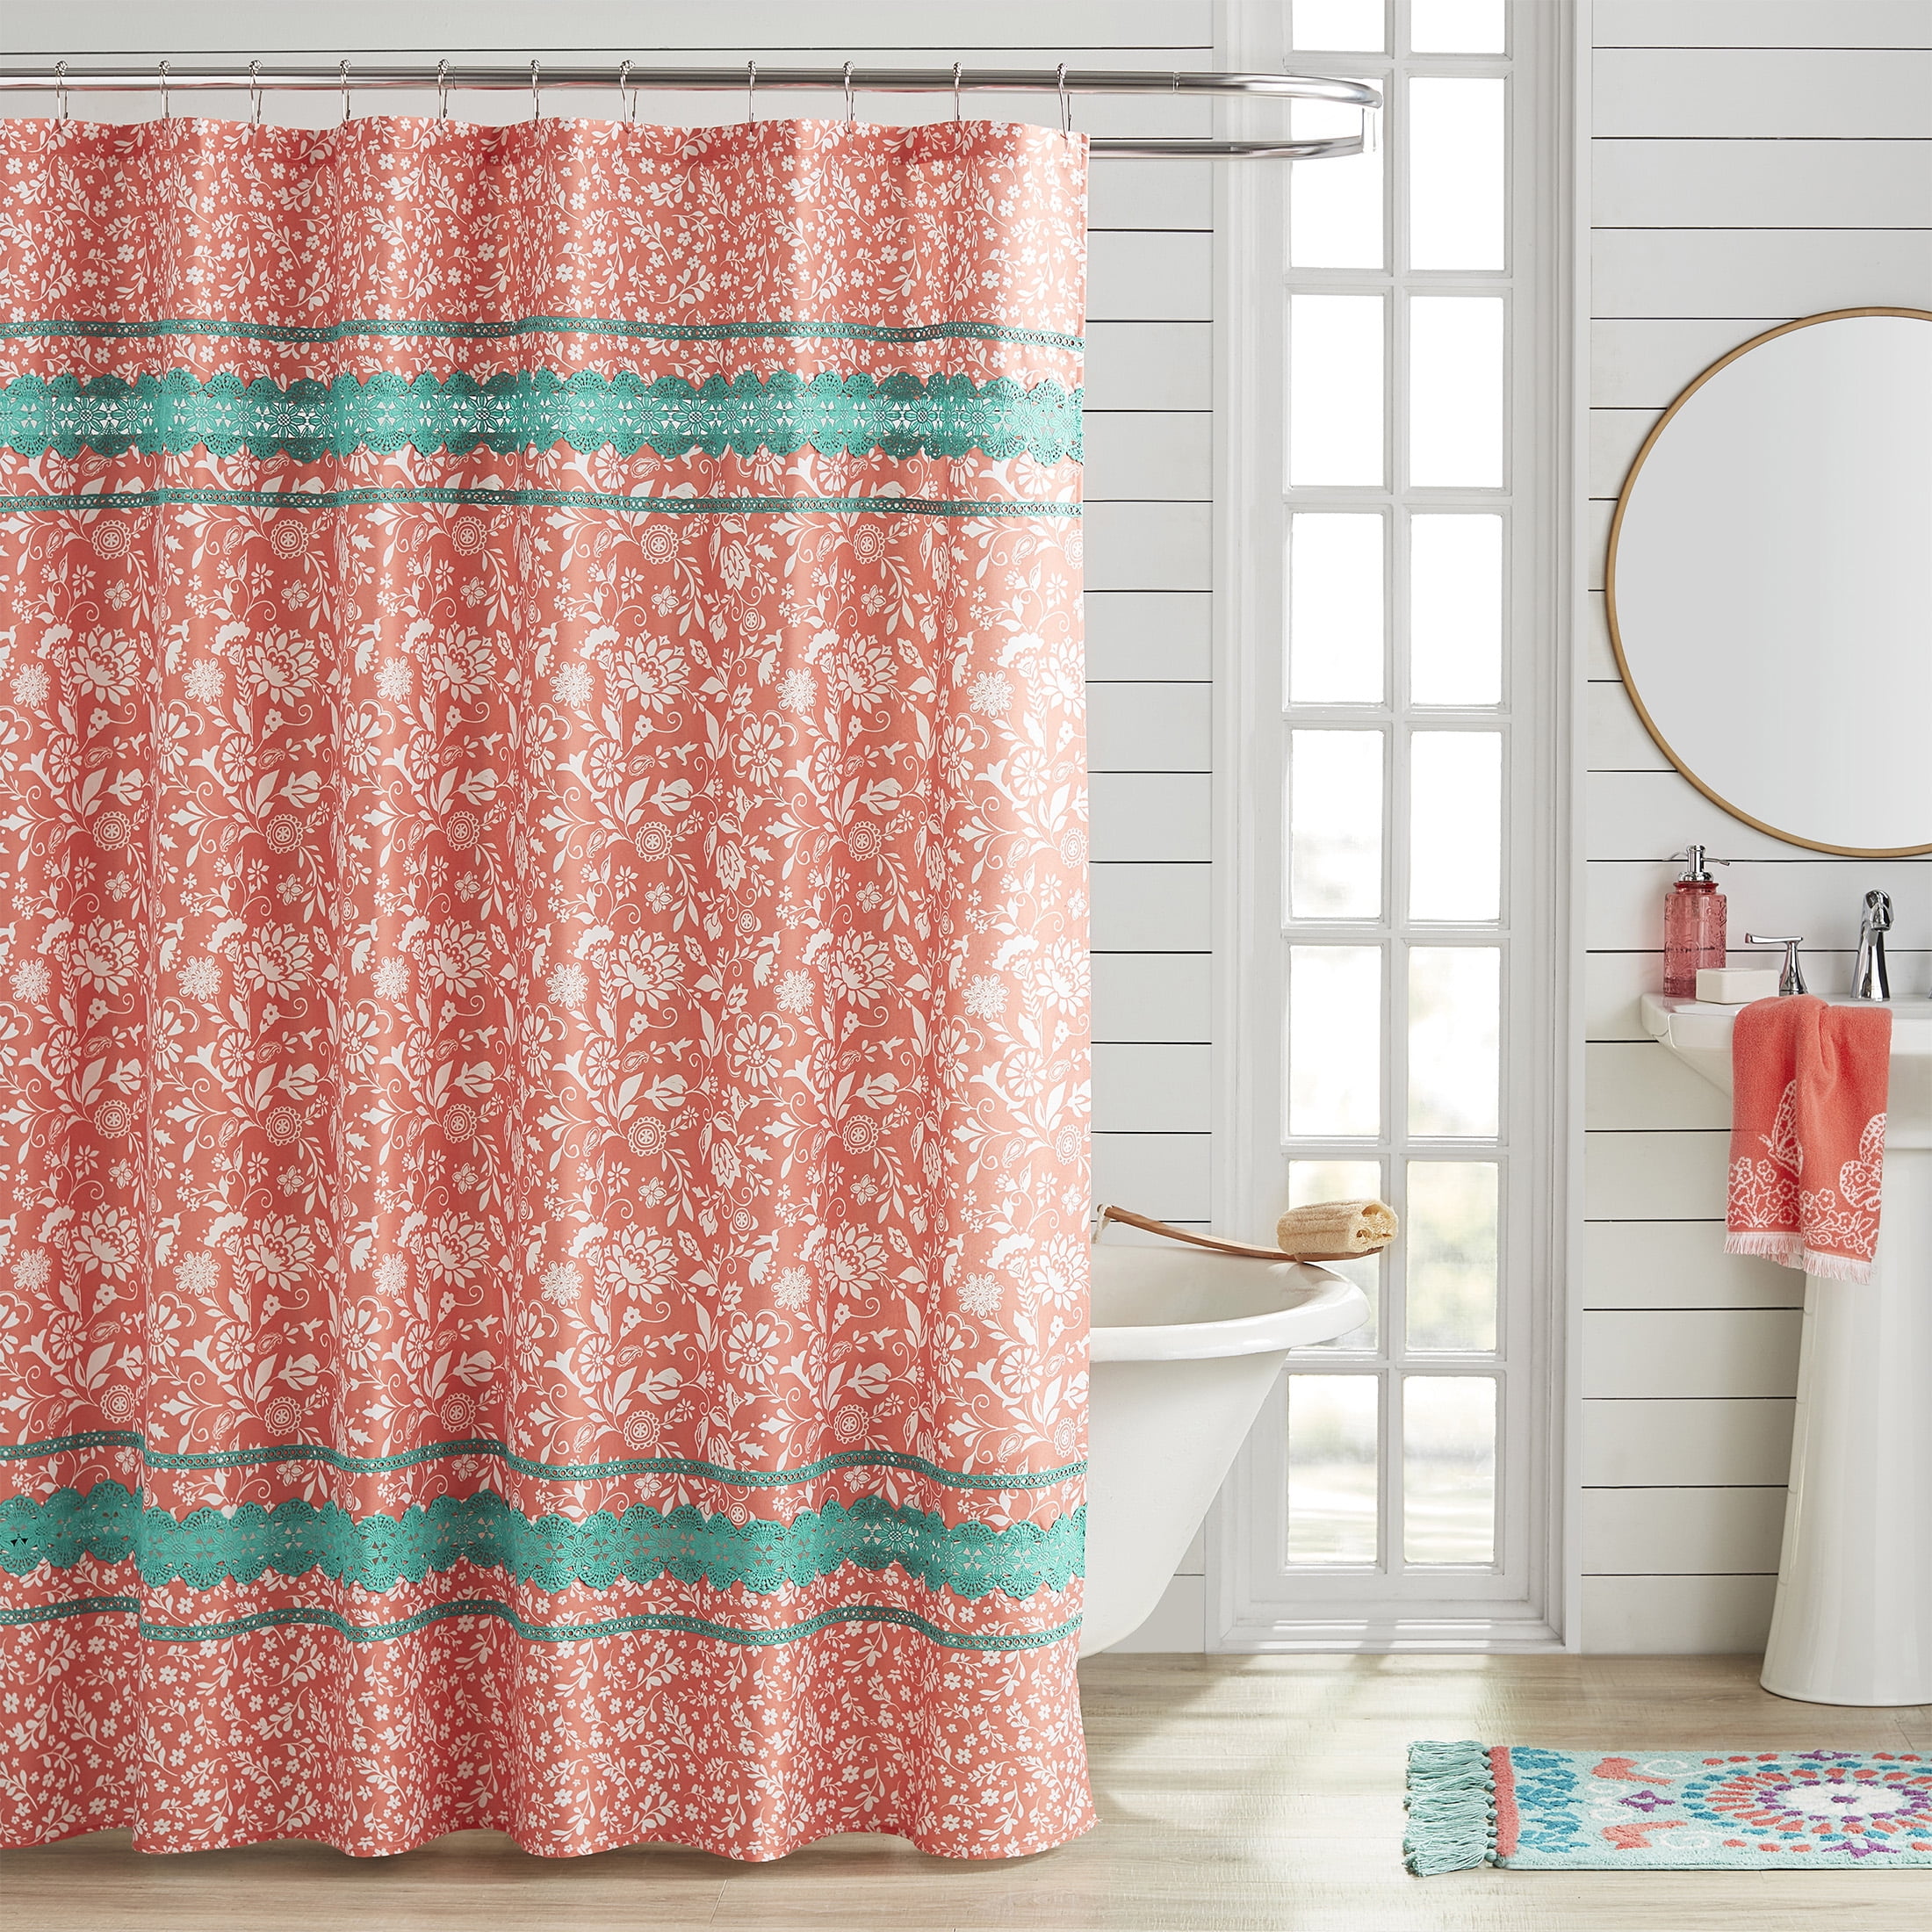 The Pioneer Woman Sweet Romance Gingham Floral Cotton-Rich Shower Curtain,  72 x 72, Multi 